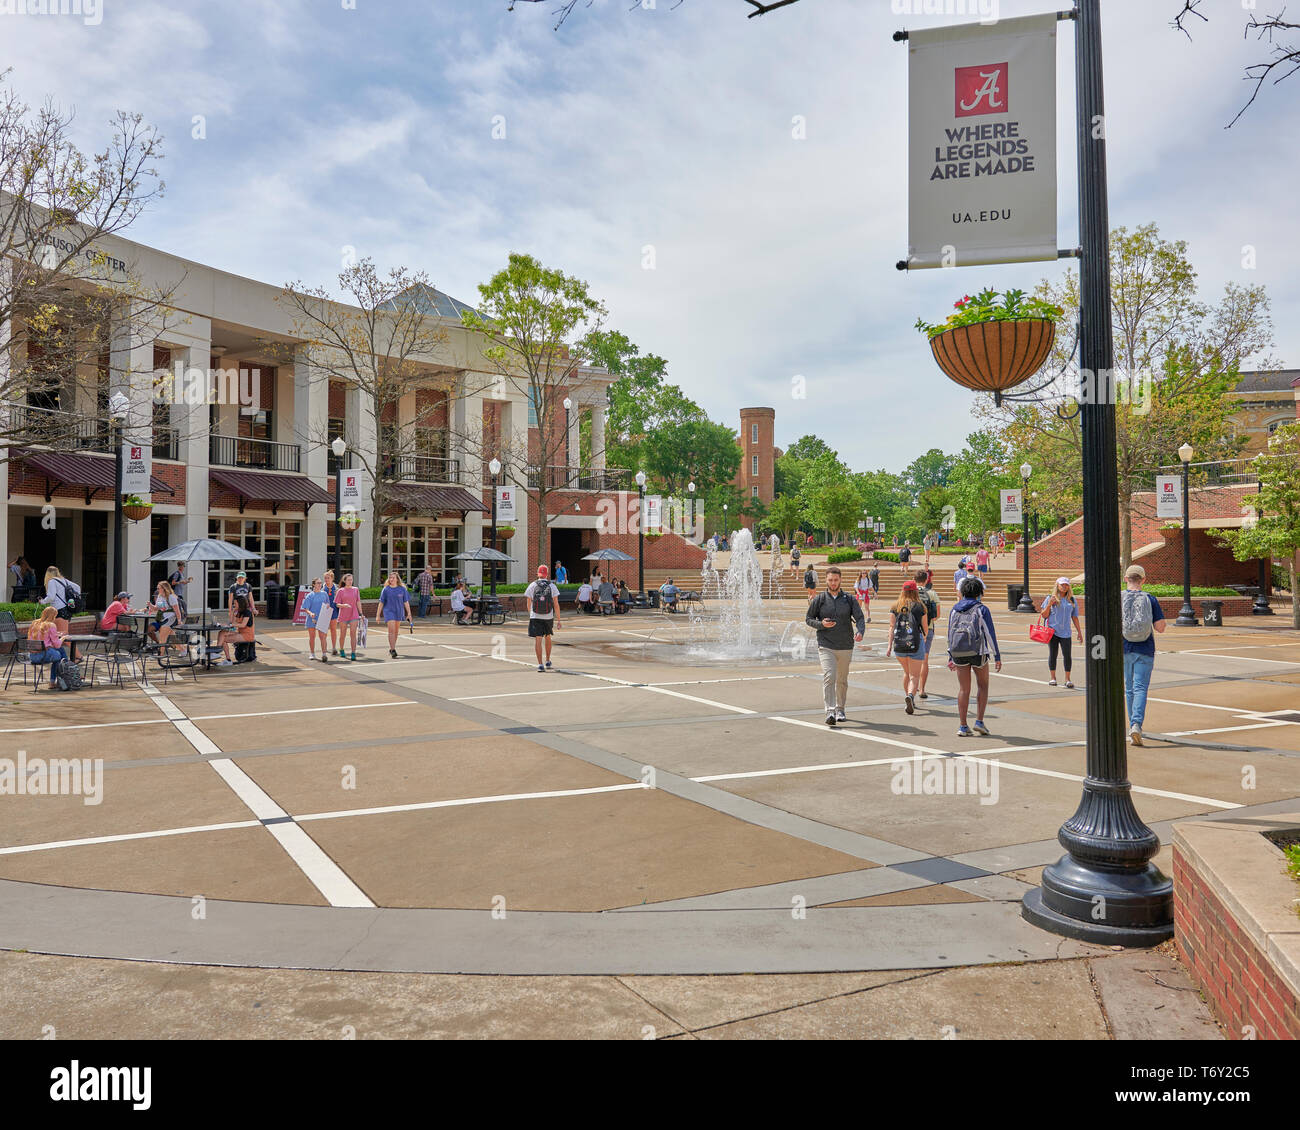 Students walking to and from classes on the campus of the University of Alabama near the Ferguson Student Center complex in Tuscaloosa Alabama, USA. Stock Photo